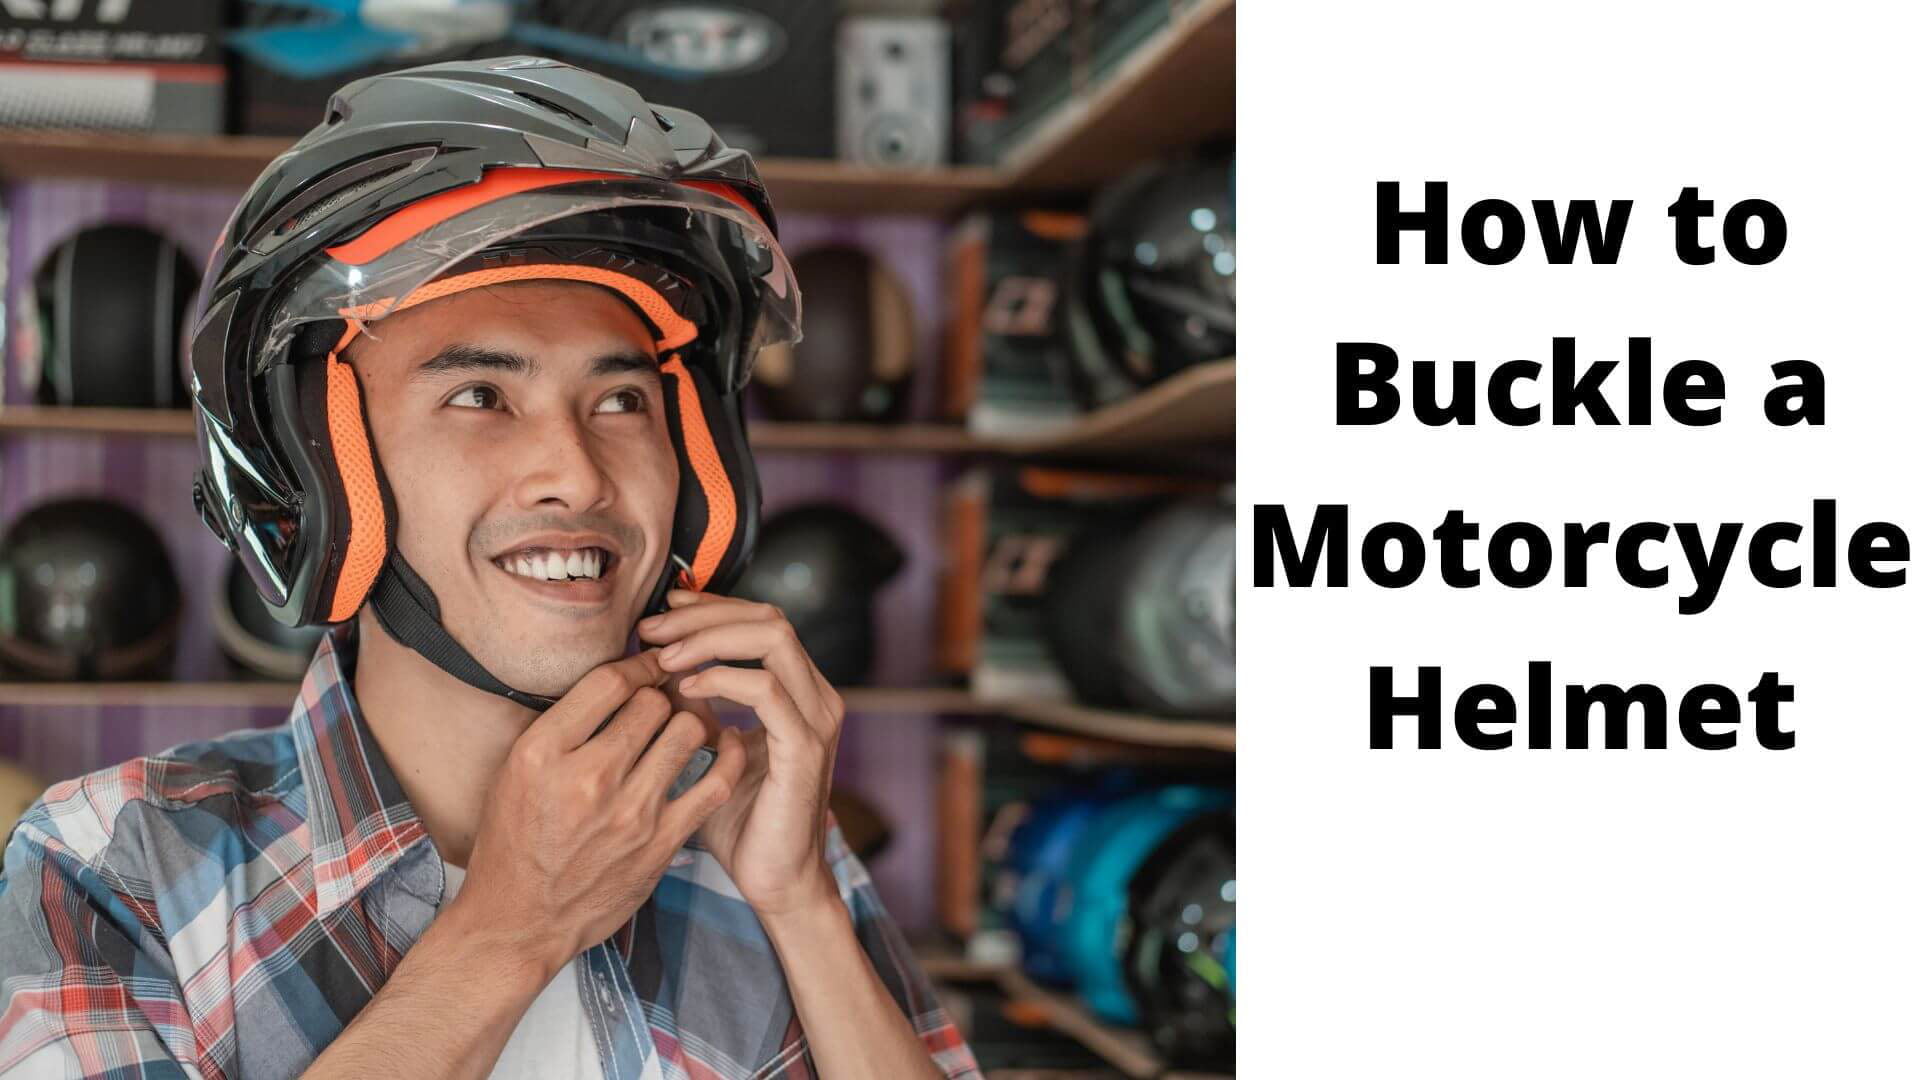 How to Buckle a Motorcycle Helmet The Right Way